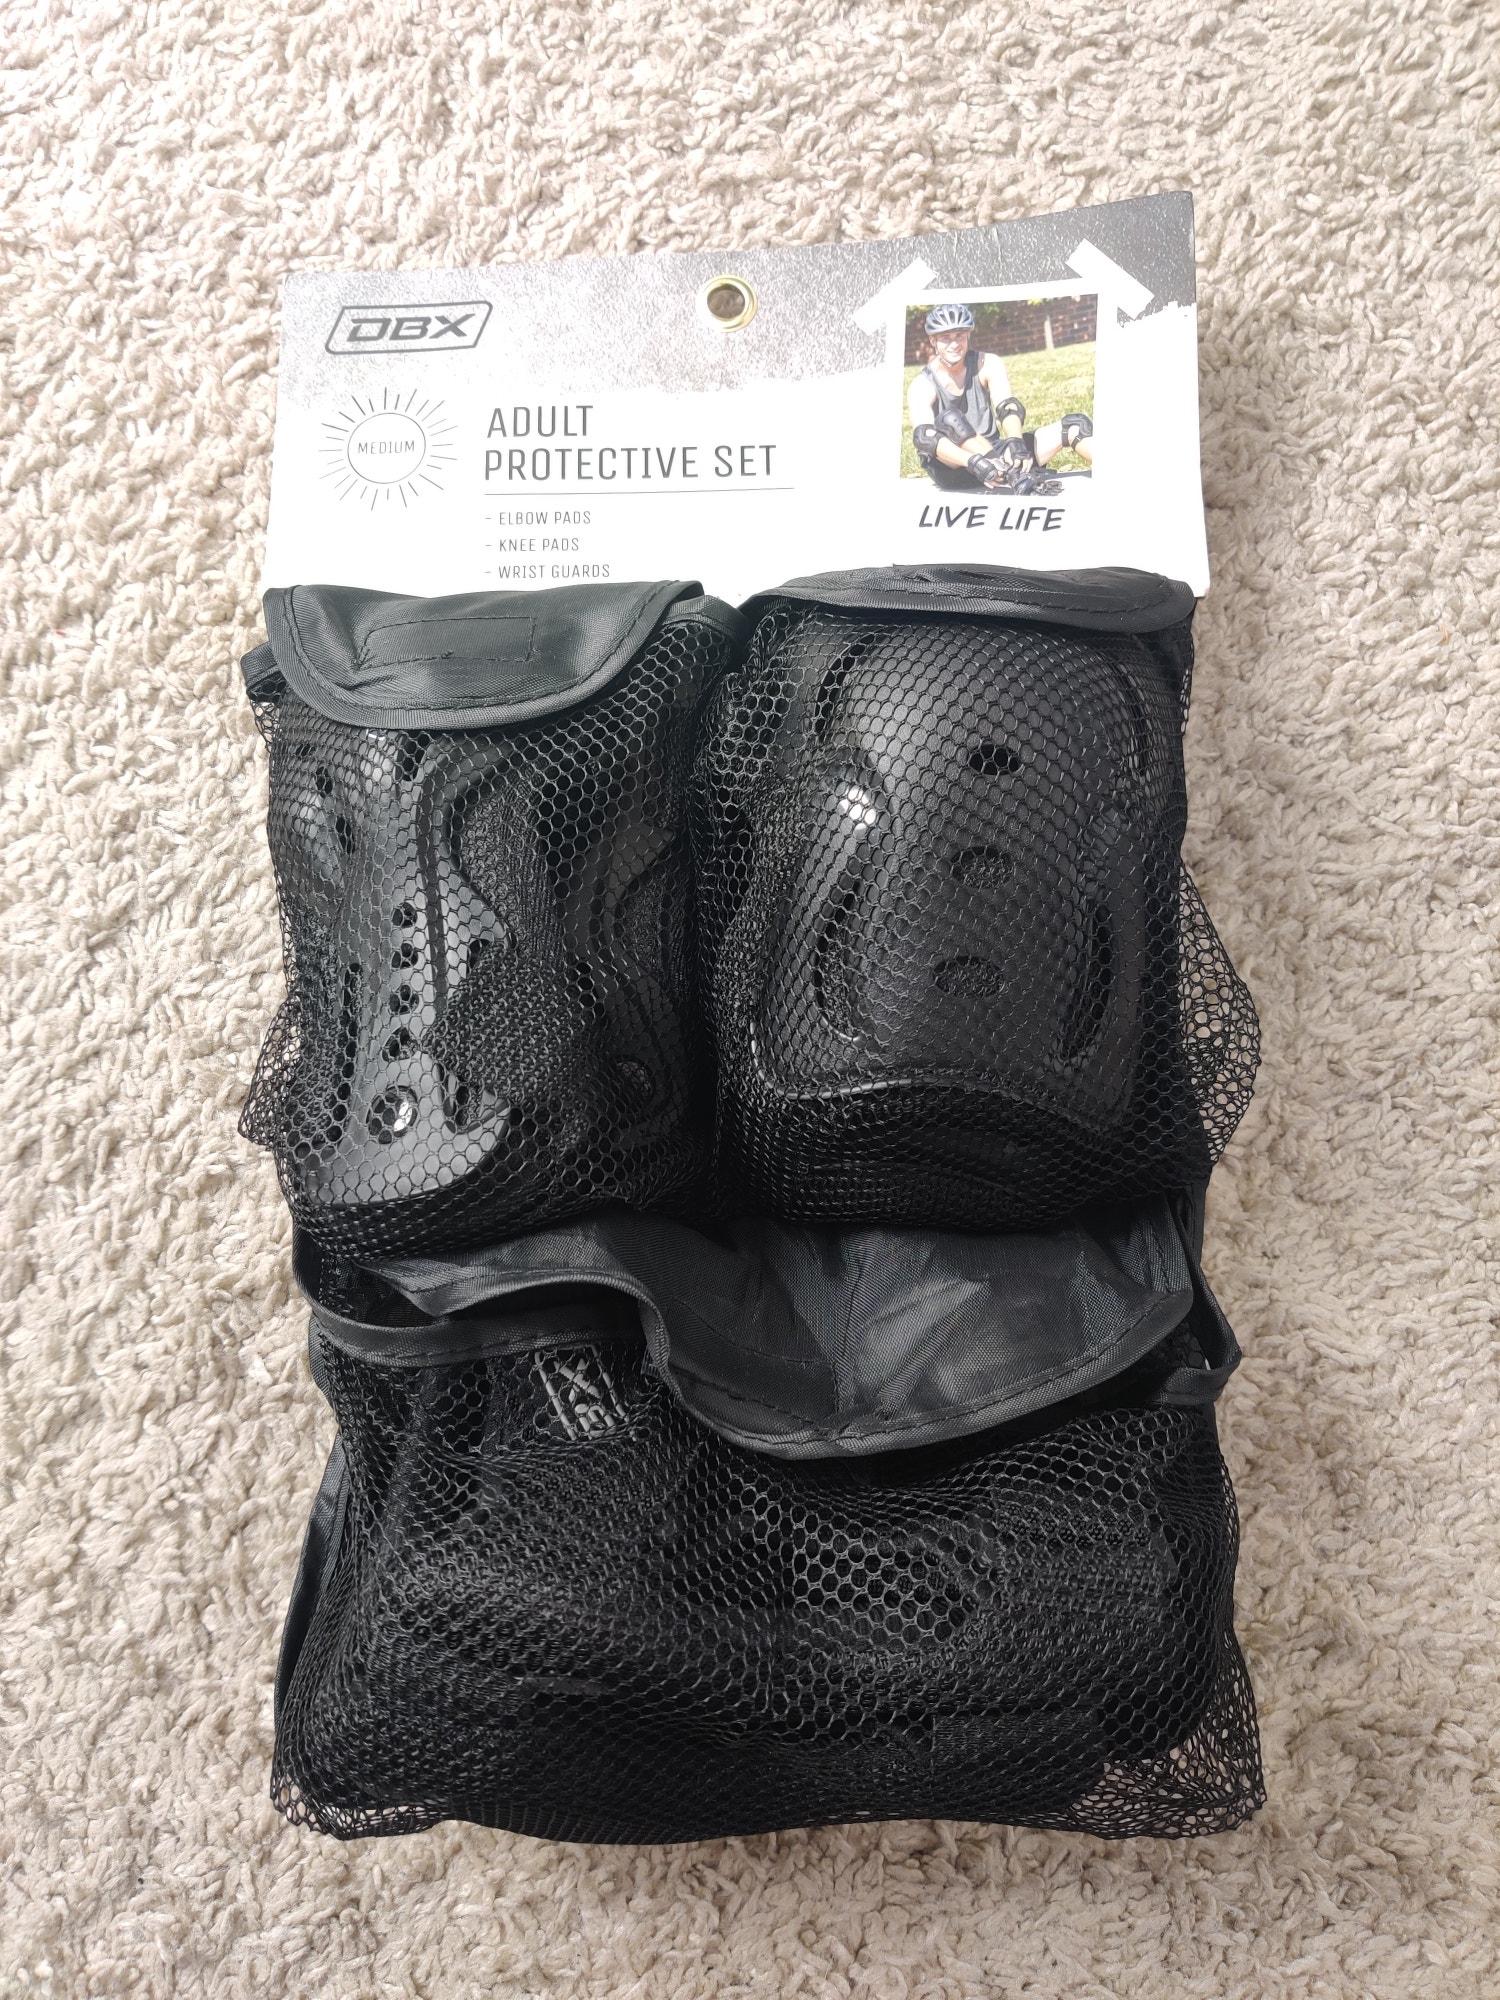 (V) New DBX adult protective set bike 🚲 sporting goods black sz M  - Picture 1 of 8